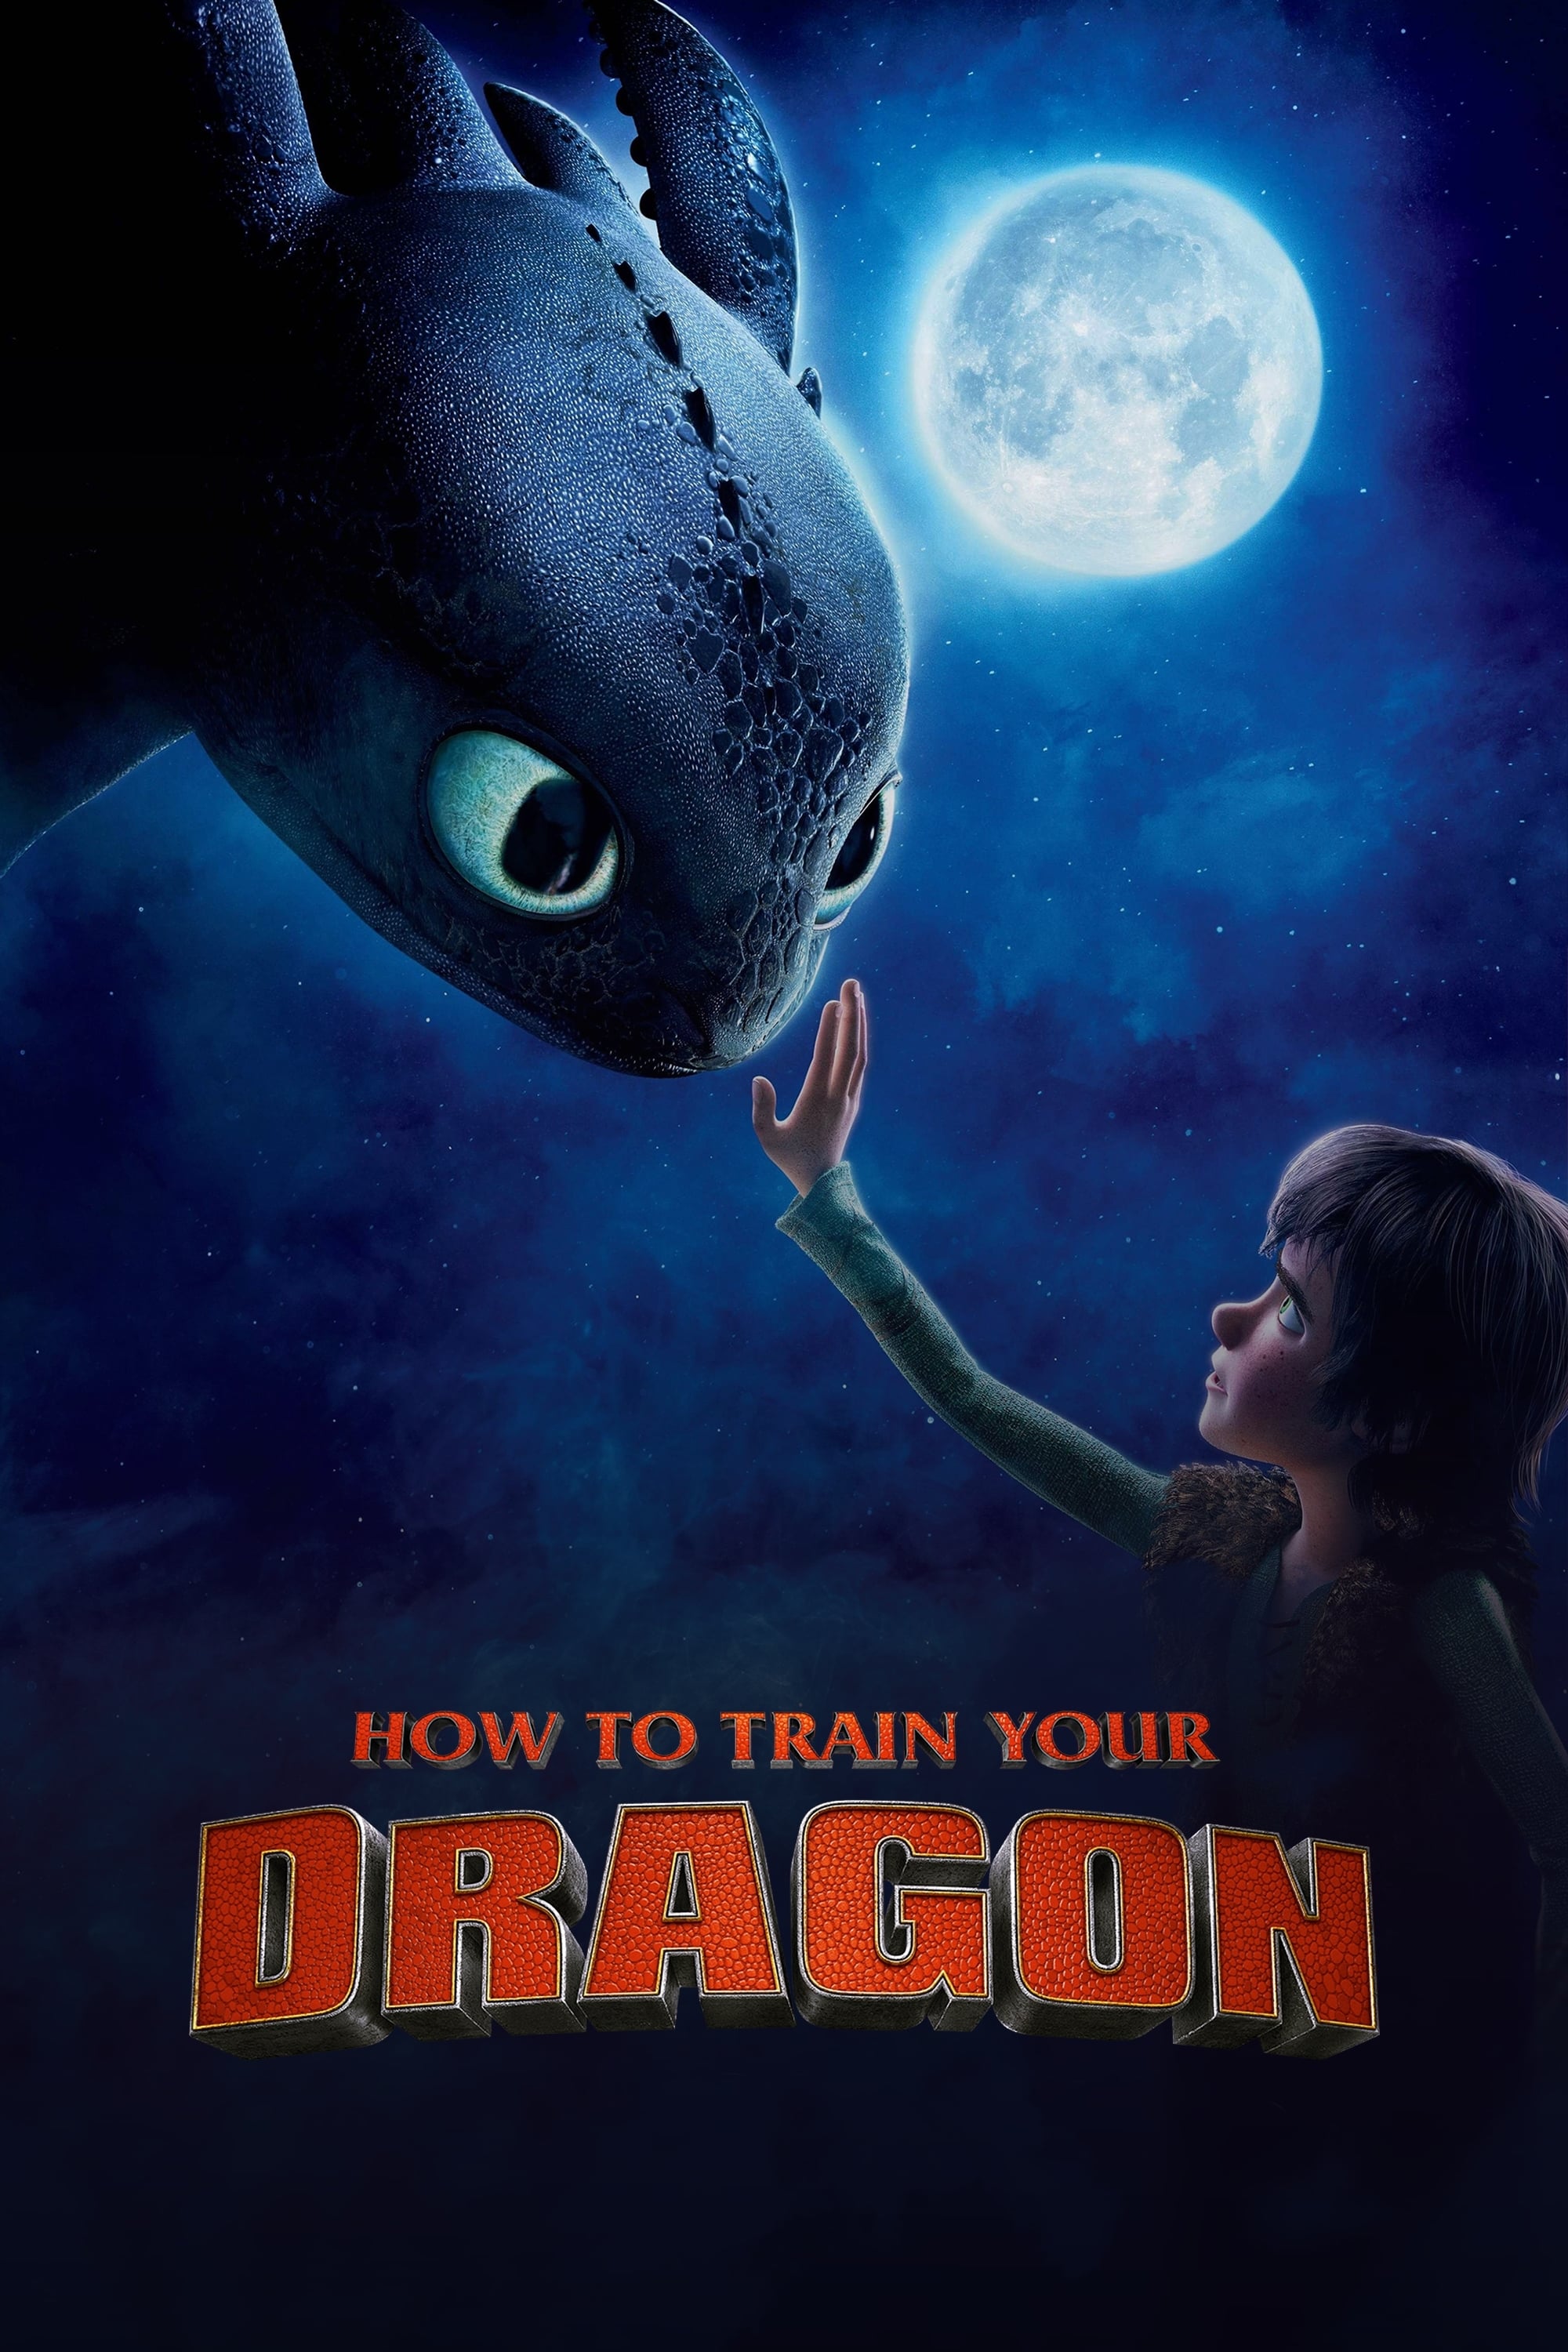 the full movie of how to train your dragon